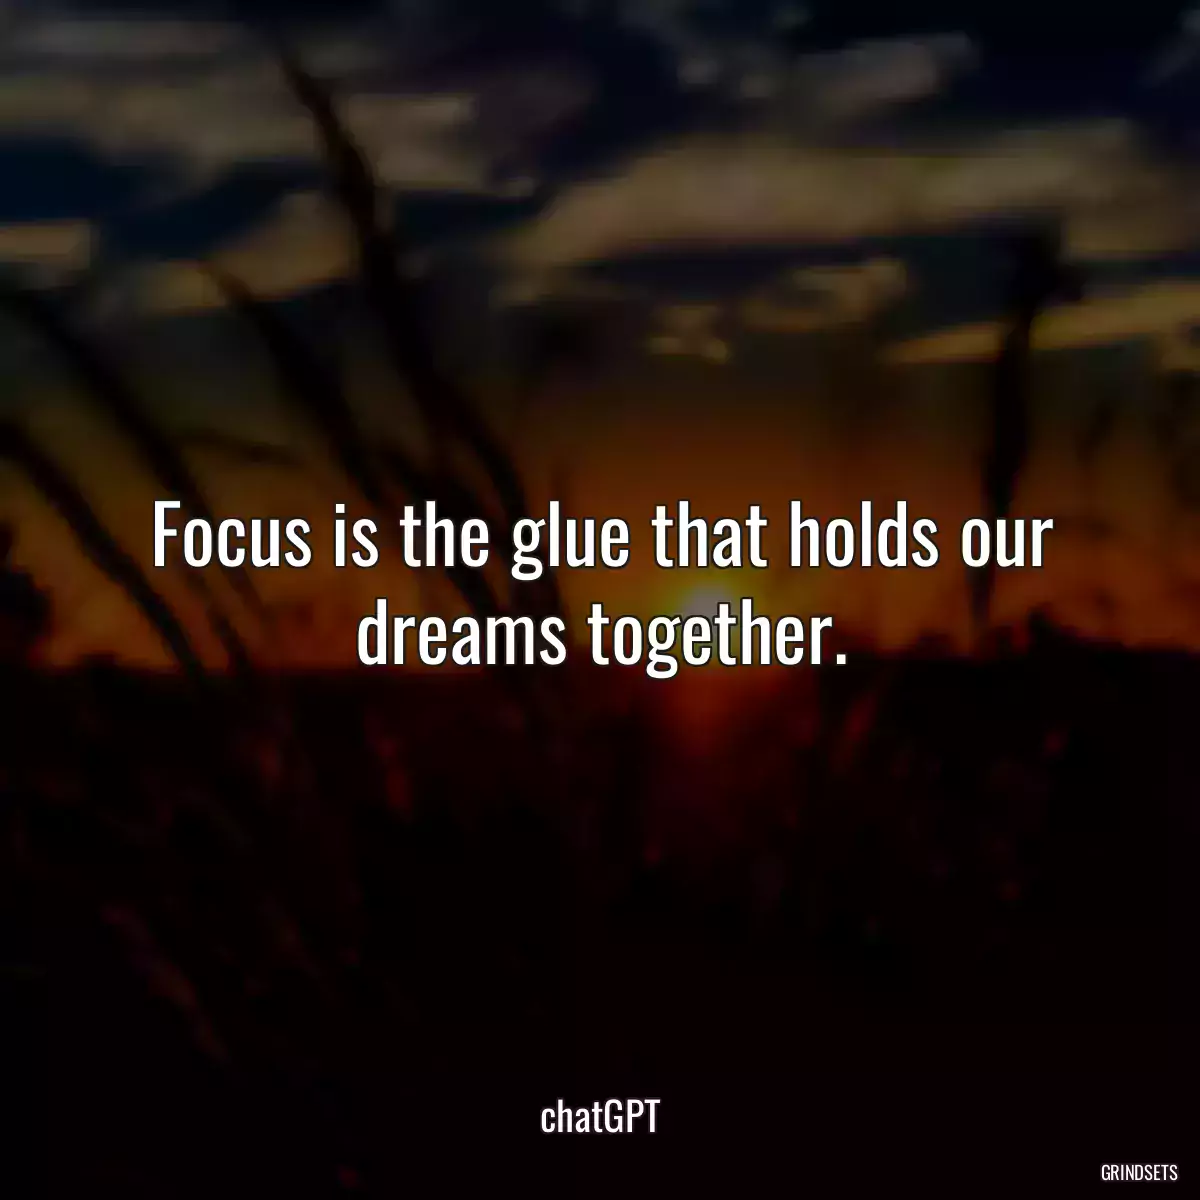 Focus is the glue that holds our dreams together.